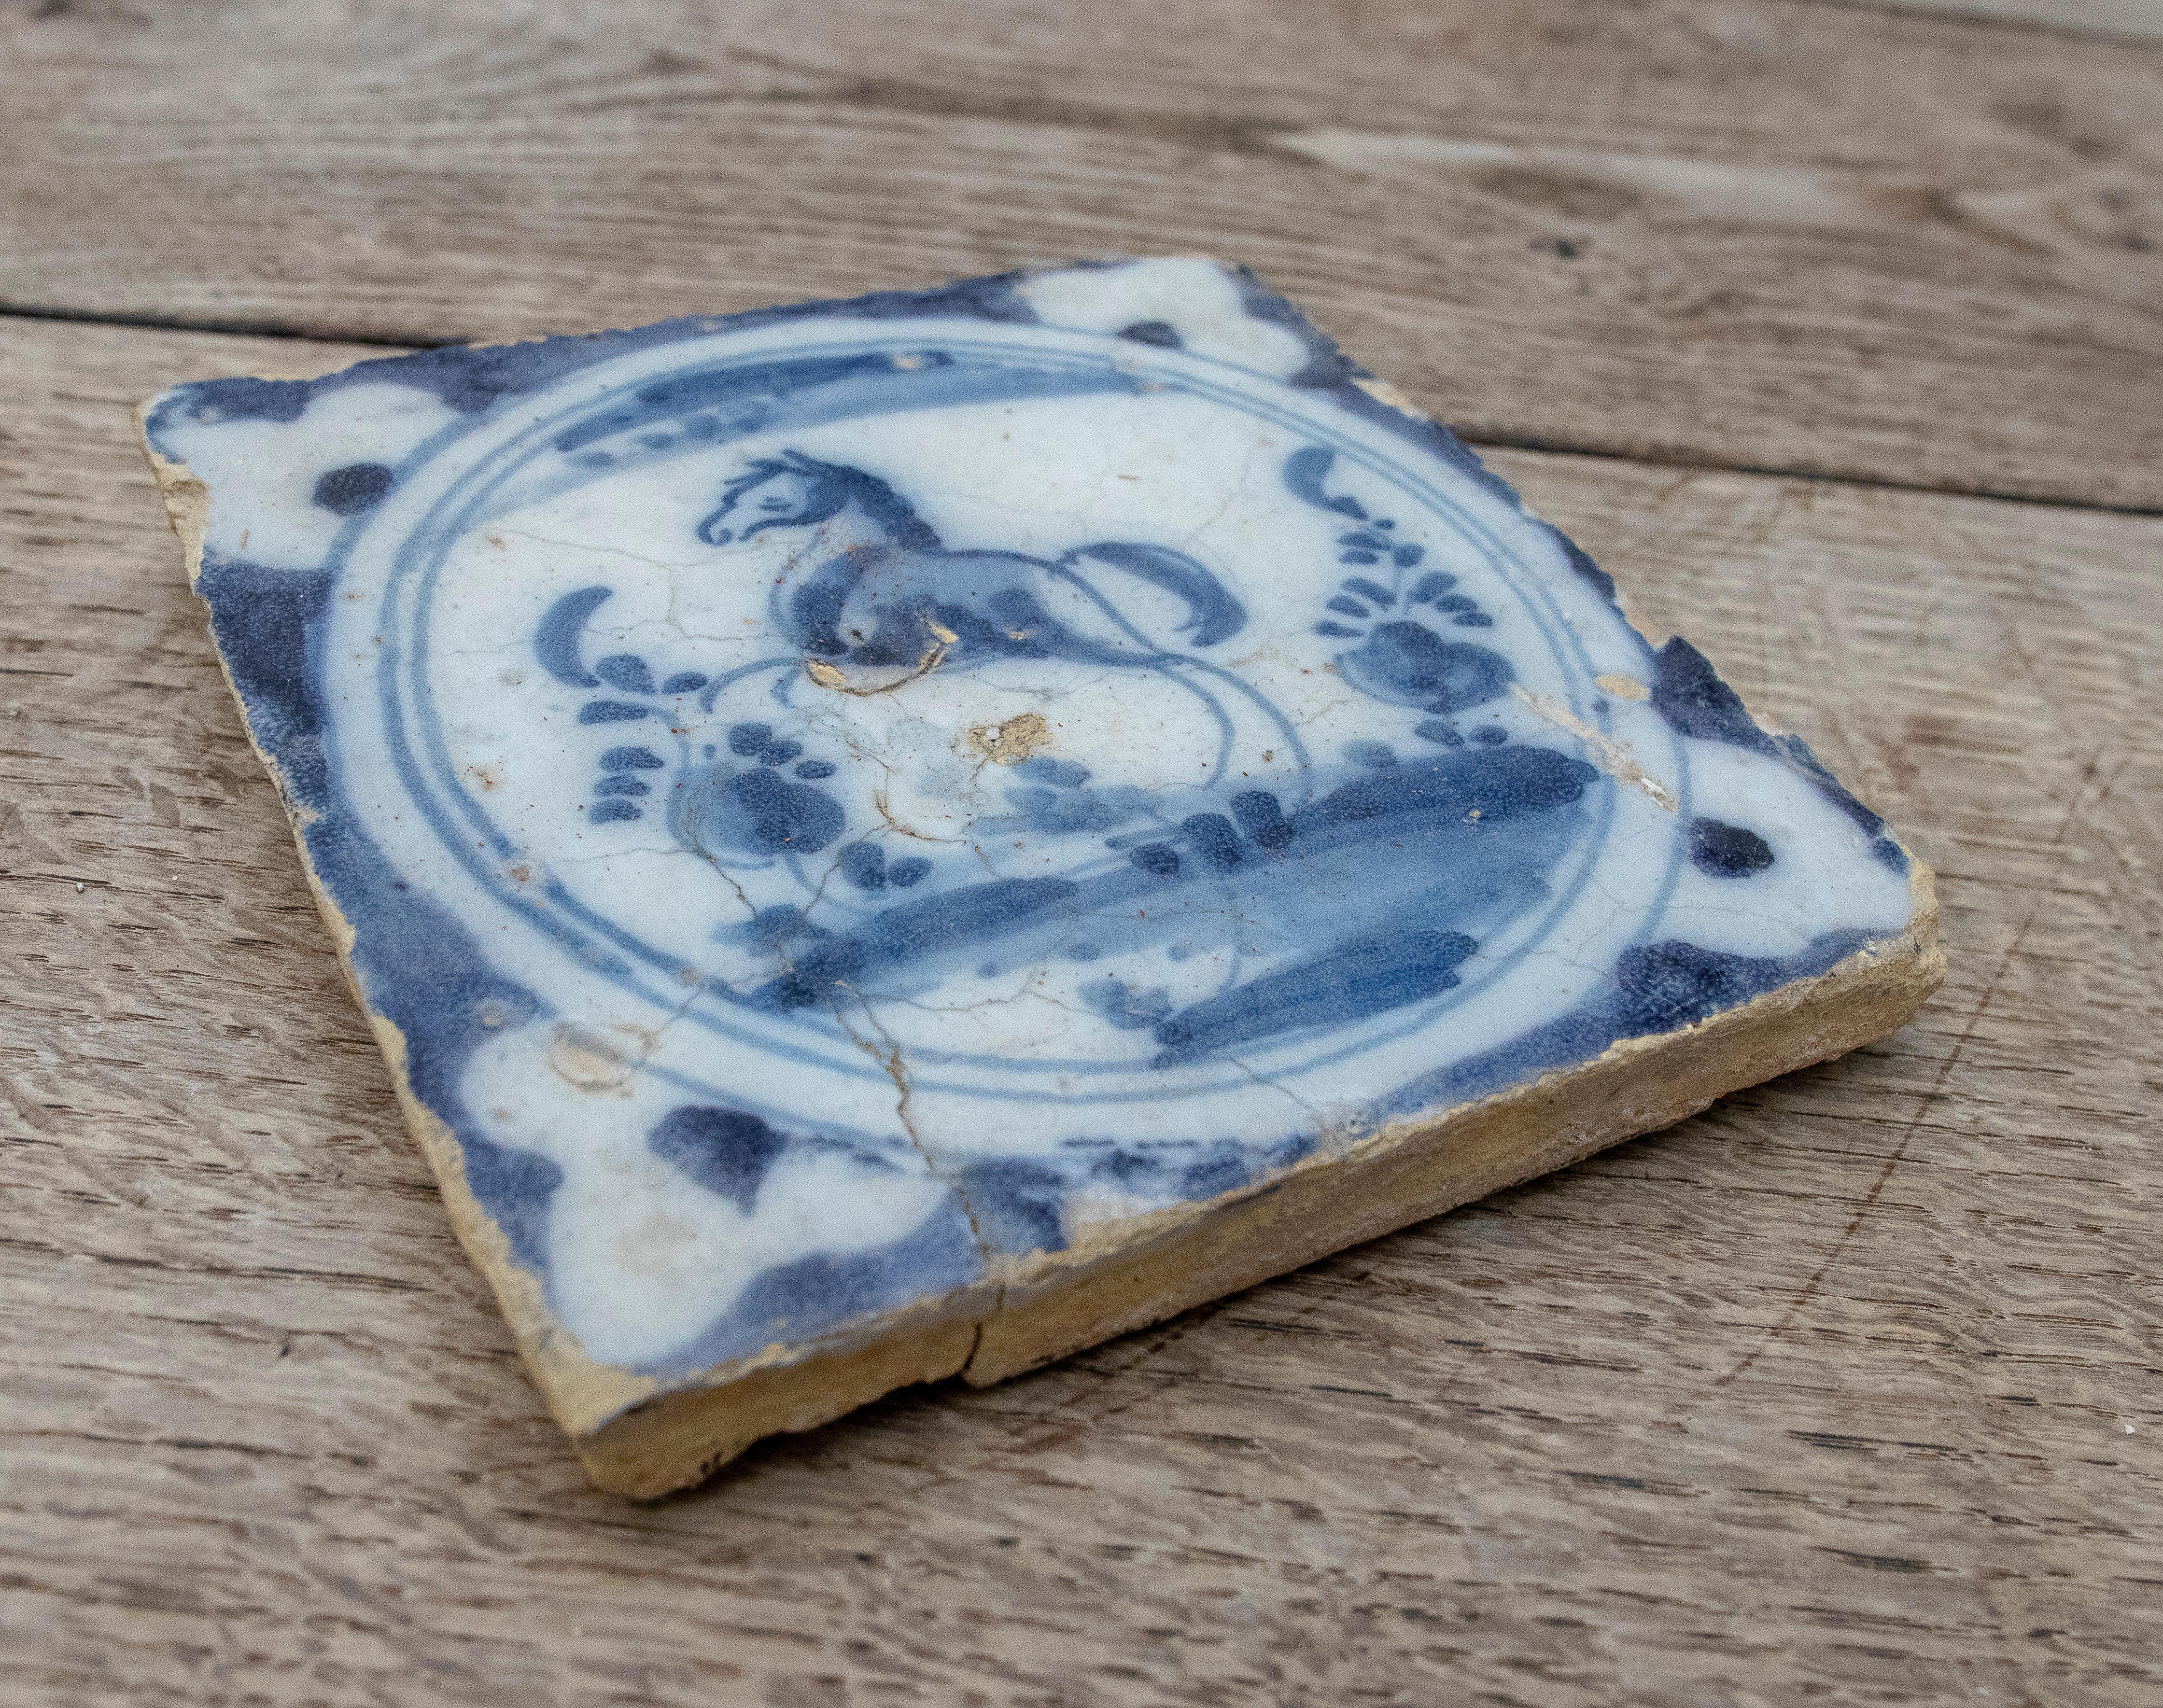 18th Century Spanish Glazed ceramic tile from Triana in Blue and White of a Hand-Painted Horse.